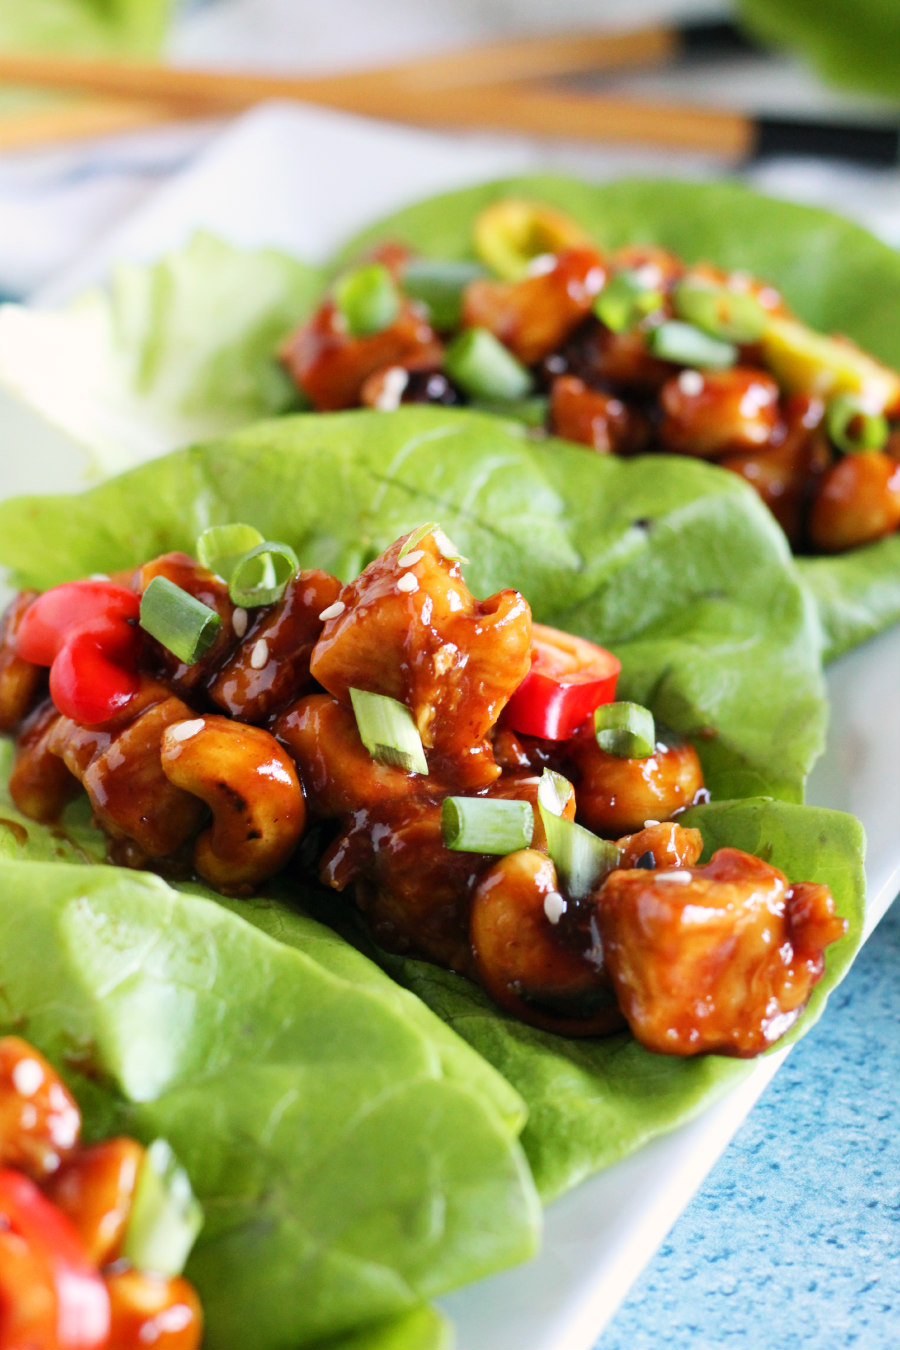 Craving Asian cuisine without the takeout price tag? Try these simple Cashew Chicken Lettuce Wraps; a budget-friendly, one-pan, 30-minute meal. Perfect for a busy weeknight meal, this dish is a healthier classic packed with Asian-inspired flavor!